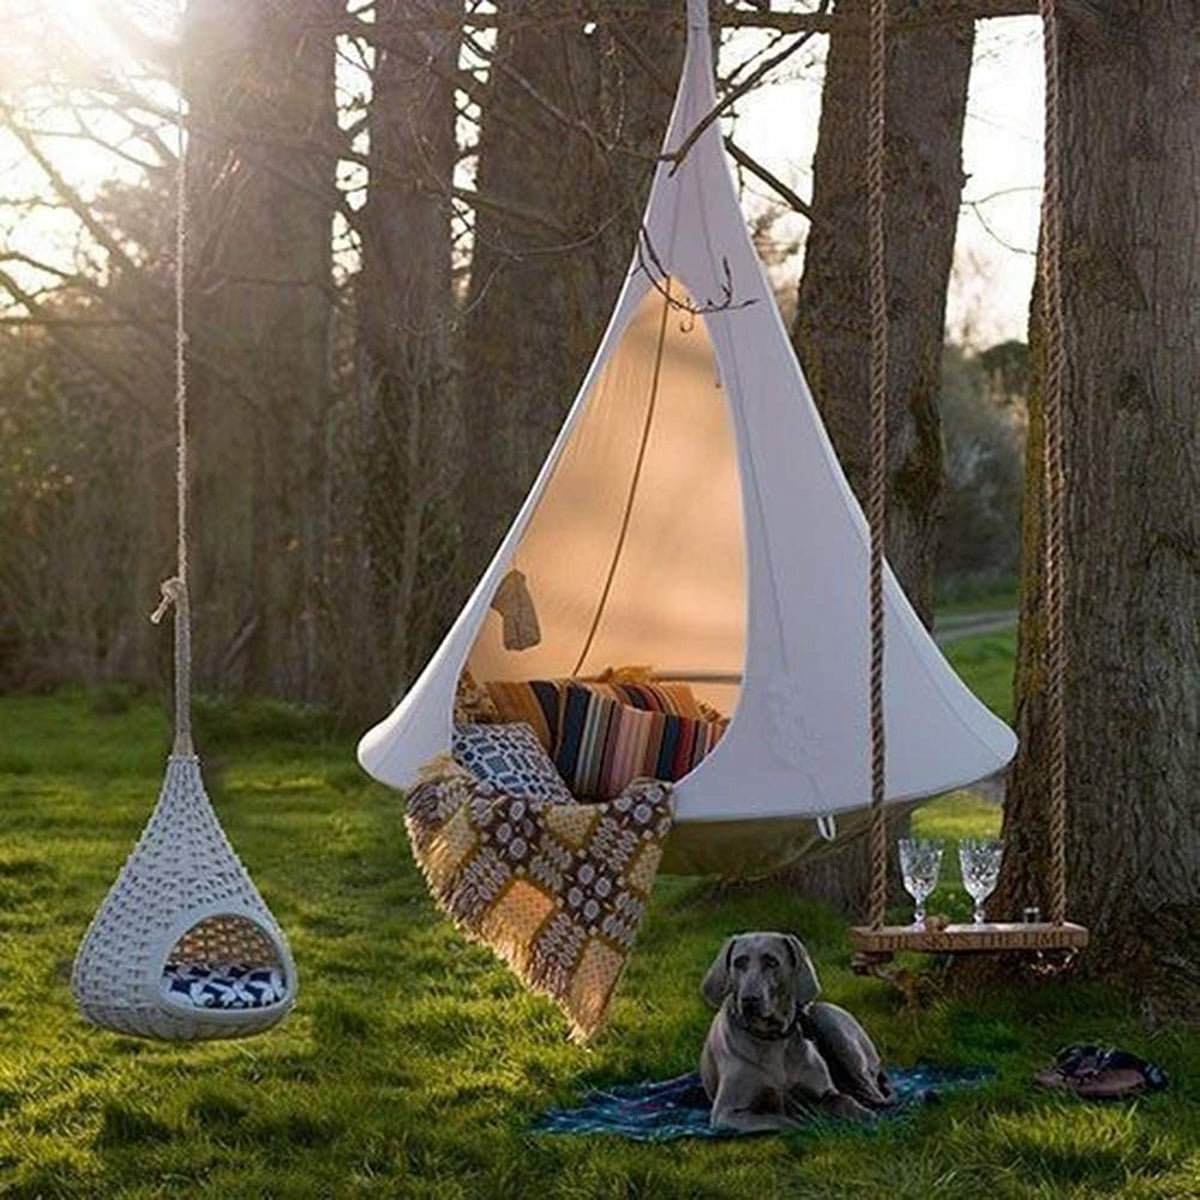 Portable Hammock Chair Hanging Tree Tent Swing Chair Nook Kids Nest